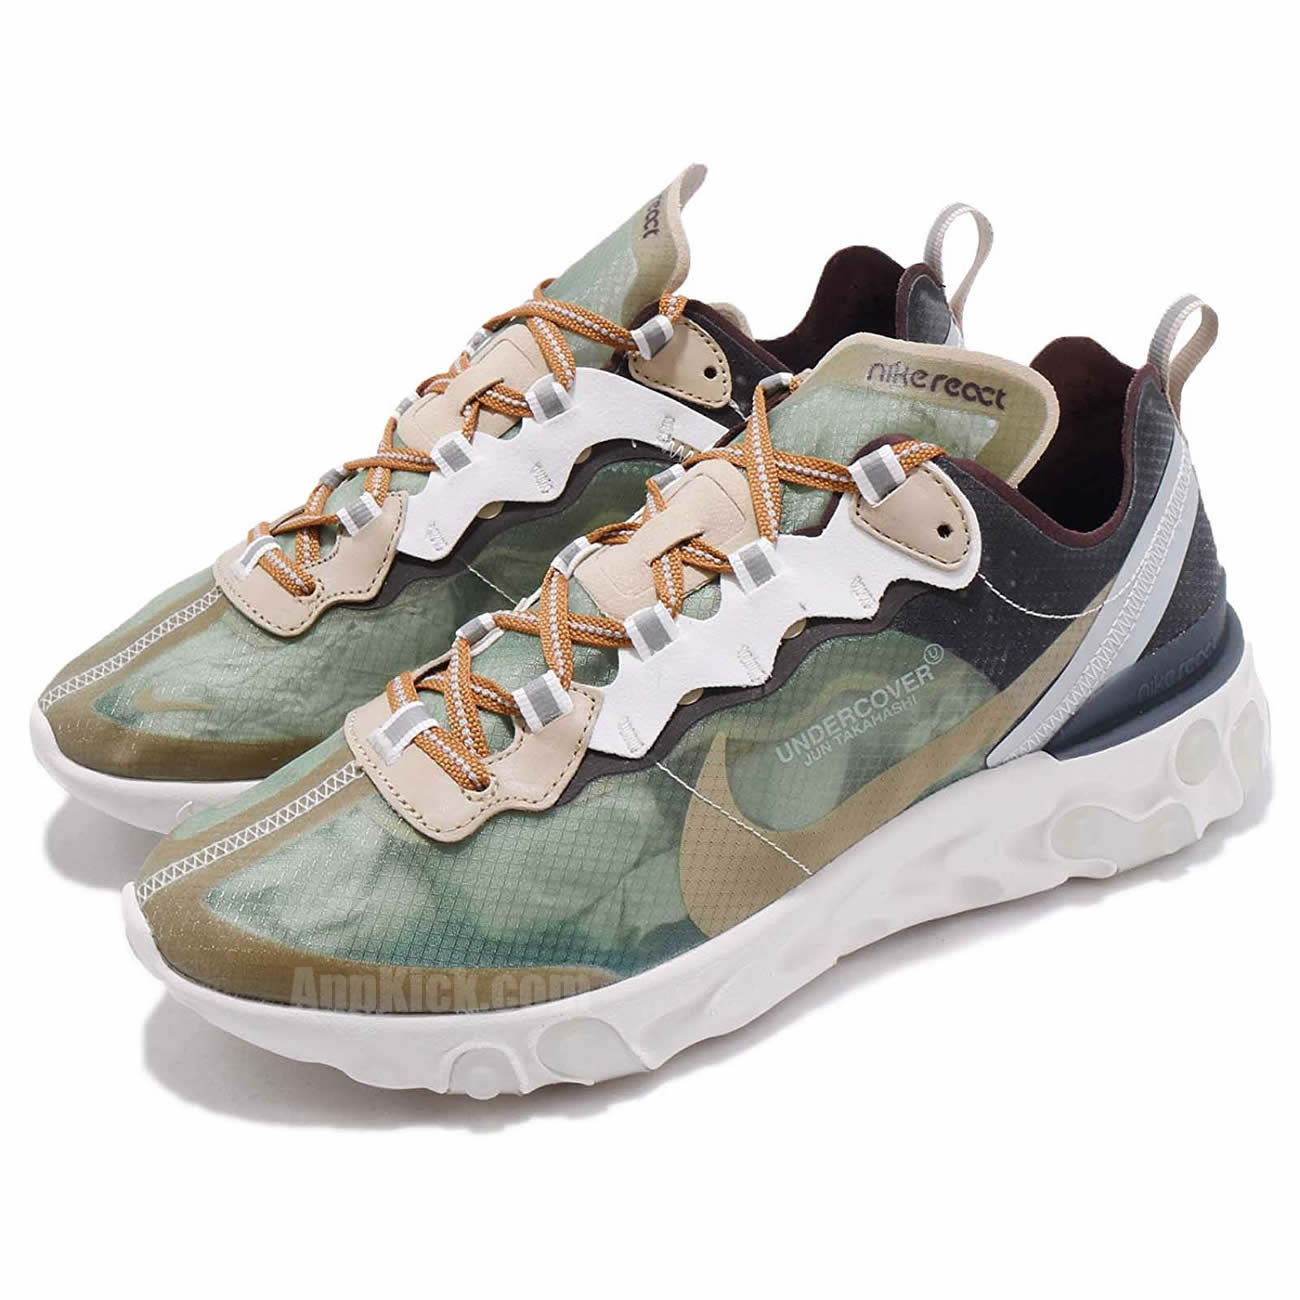 Undercover x Nike React Element 87 "Green Mist" Shoes Collection BQ2718-300